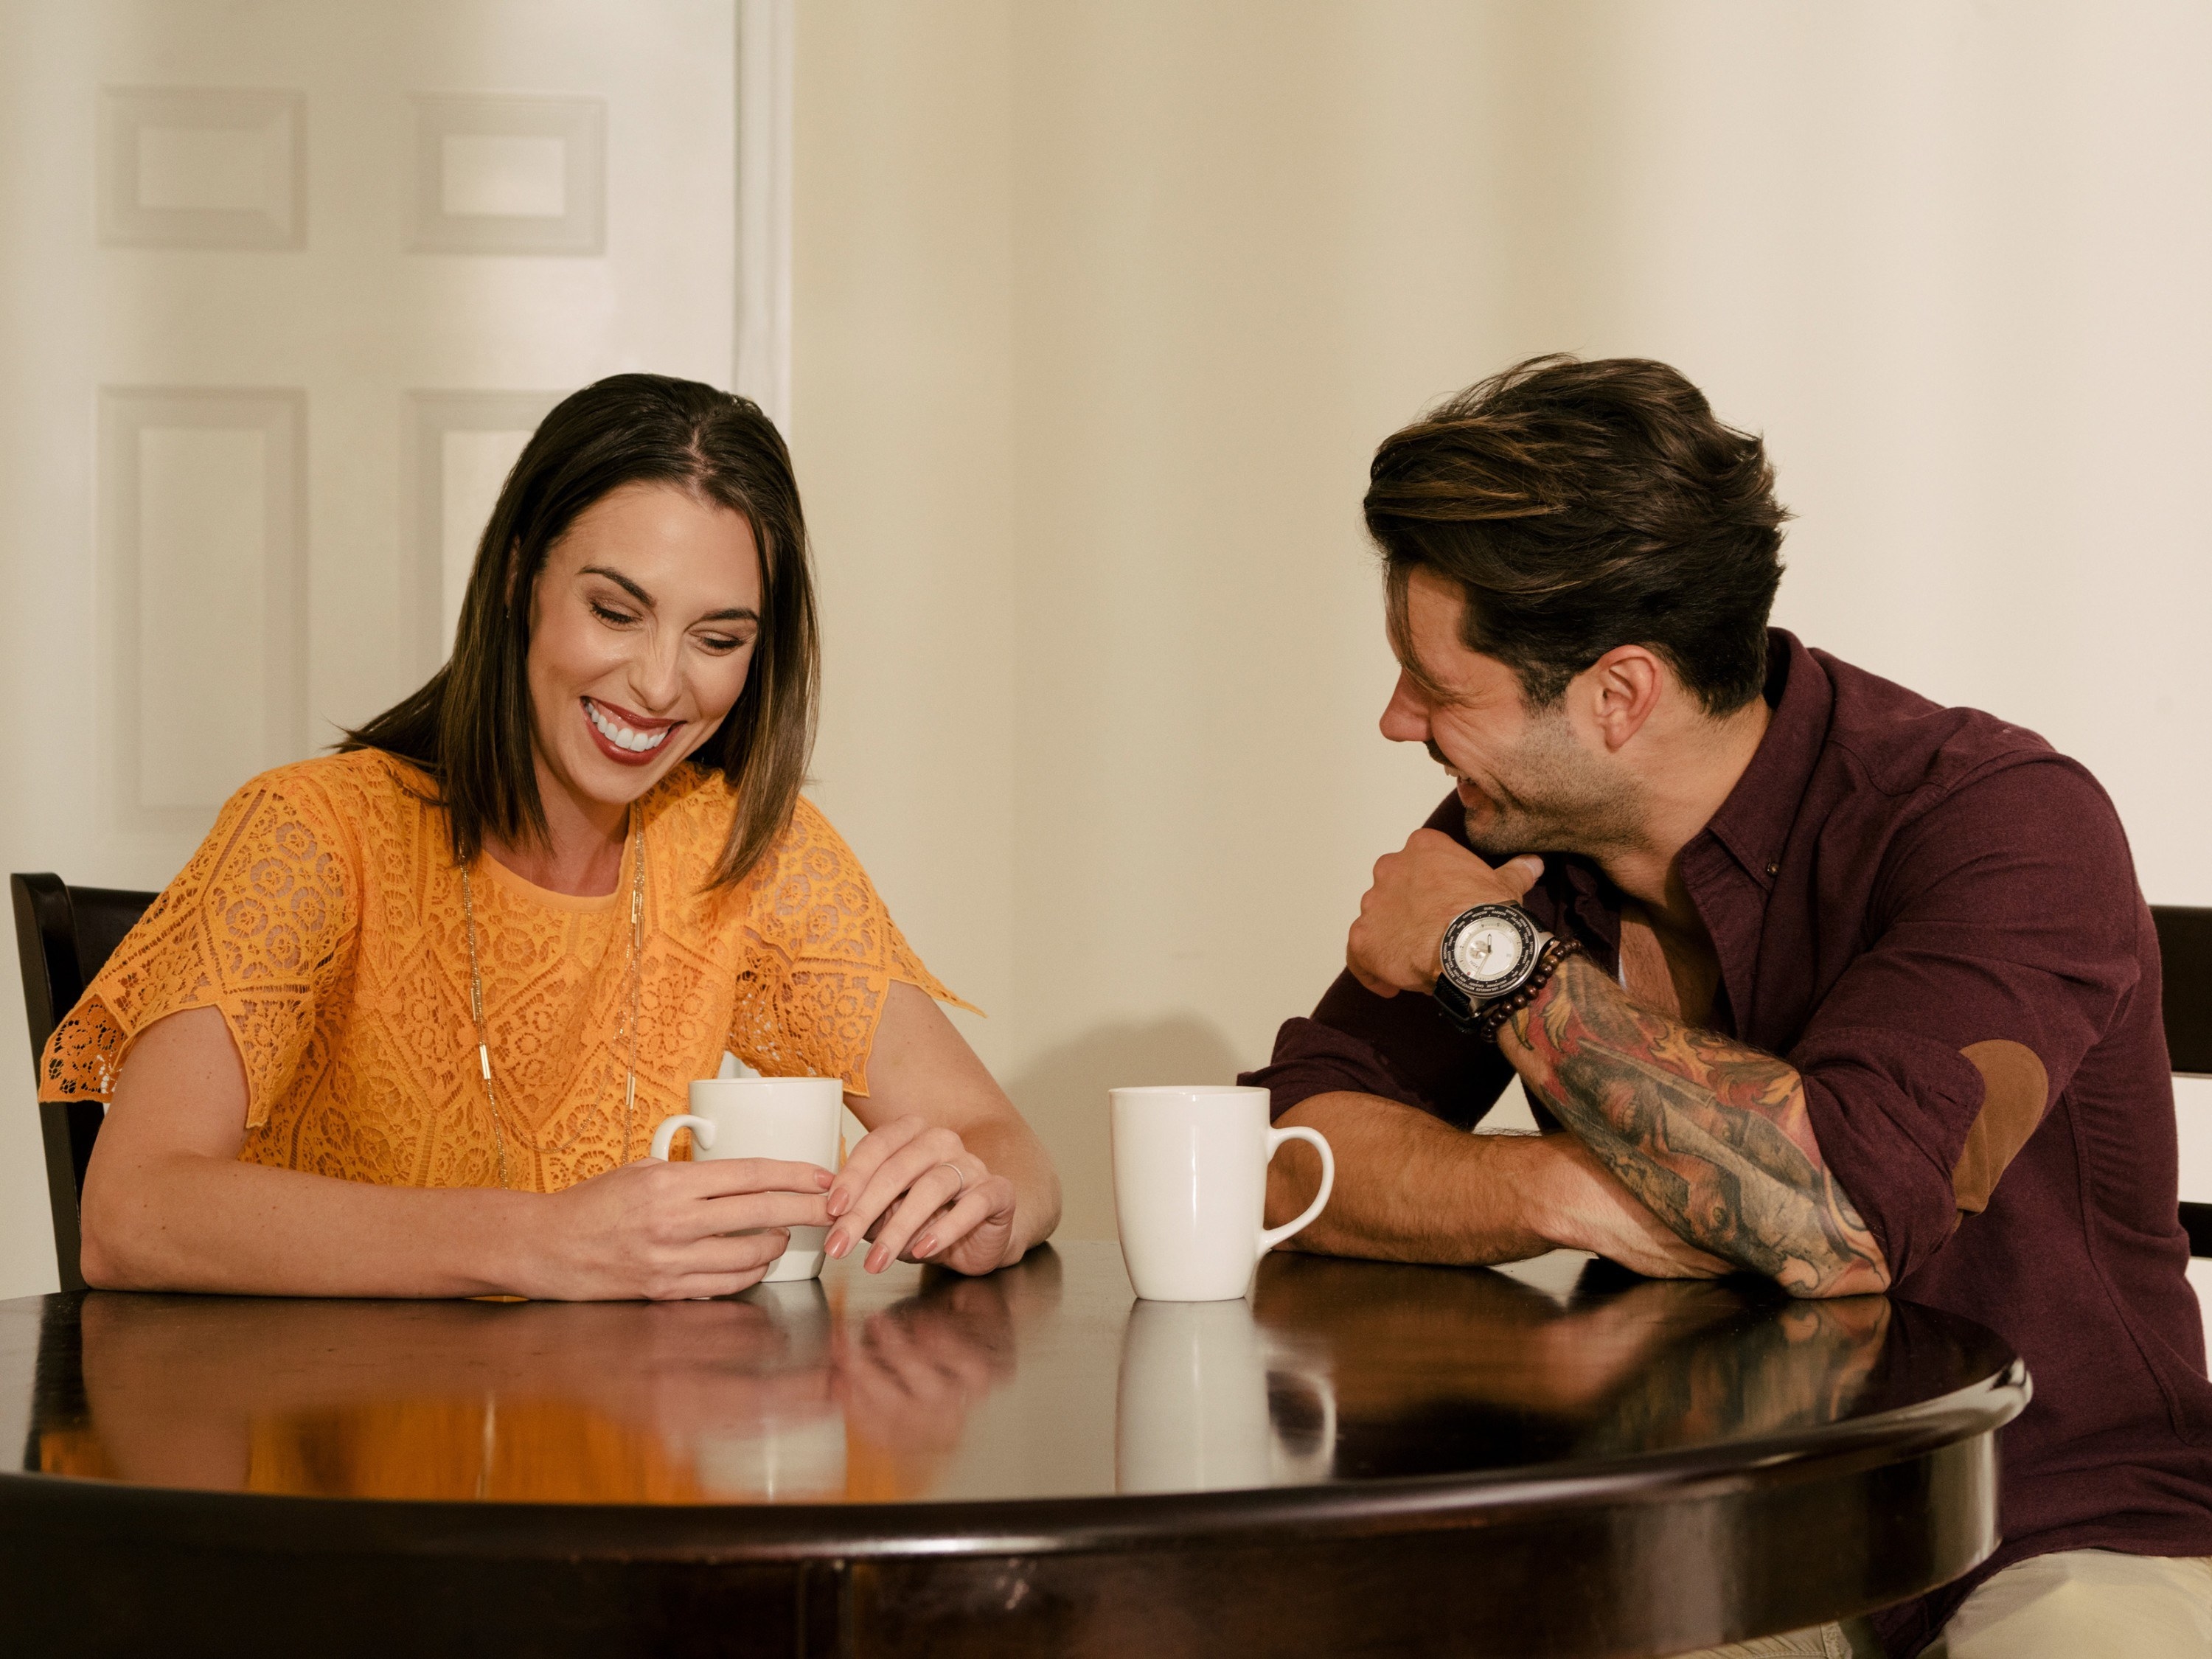 A man and a woman sit at a table, laughing together